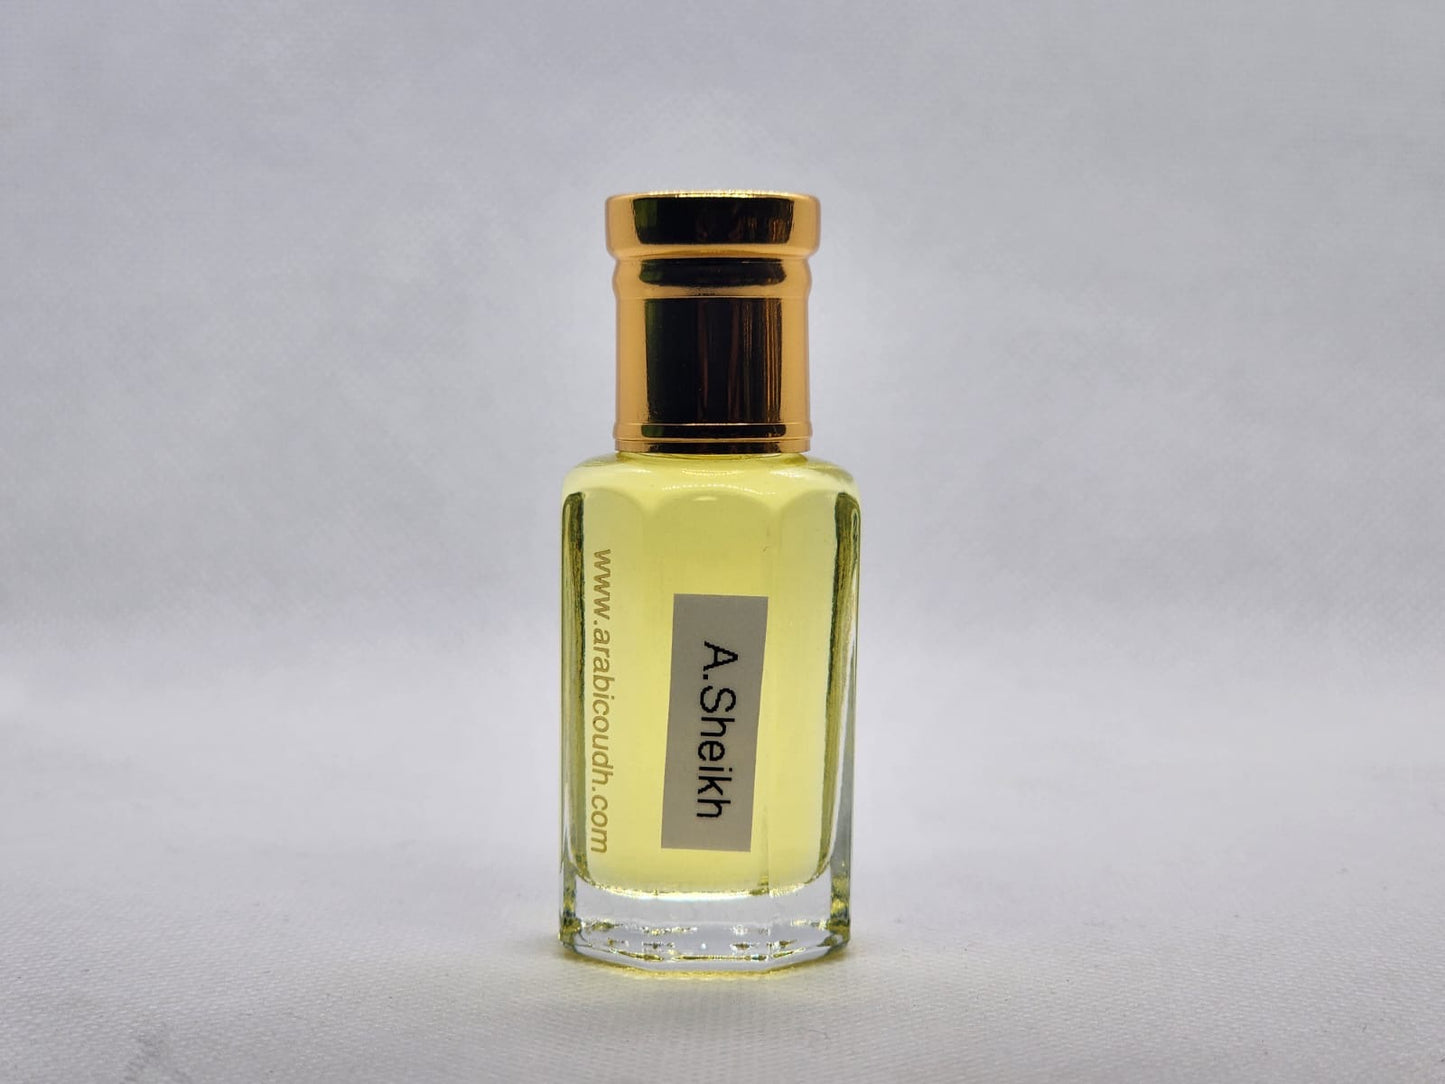 Sheikh 2. Perfume Oil / Attar - Concentrated Perfume Oil - Alcohol free